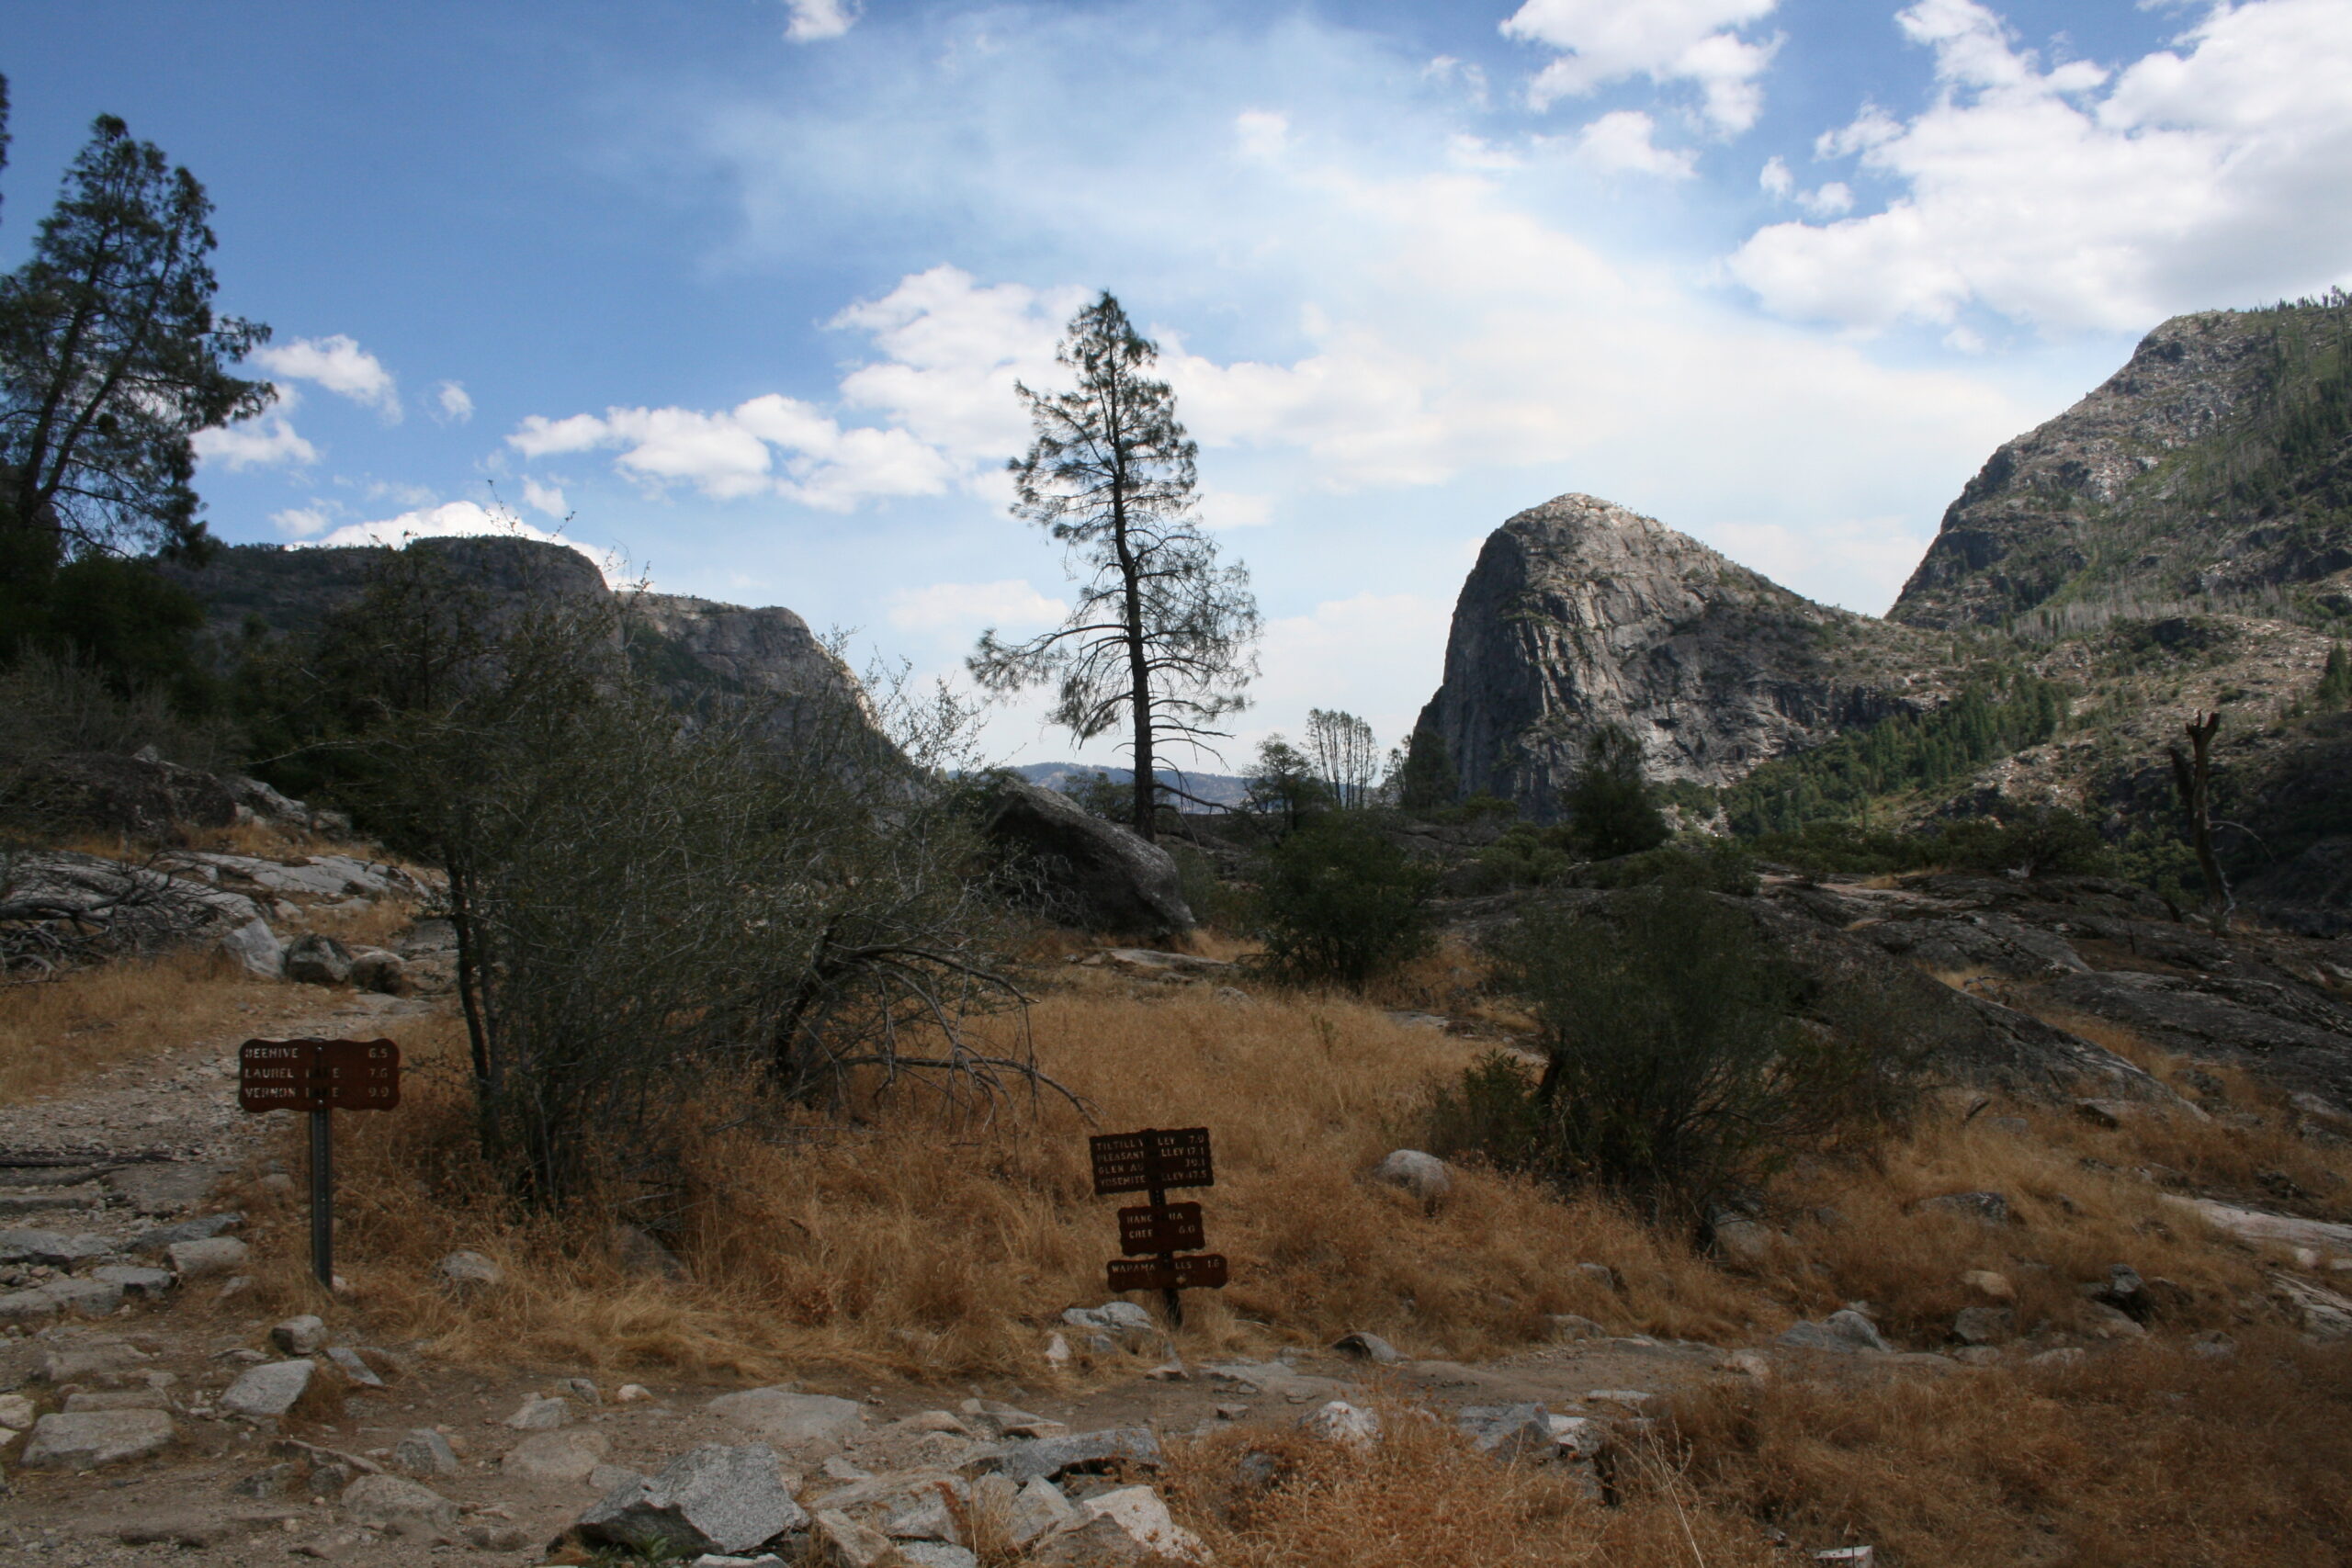 Hetch Hetchy view with trail signs